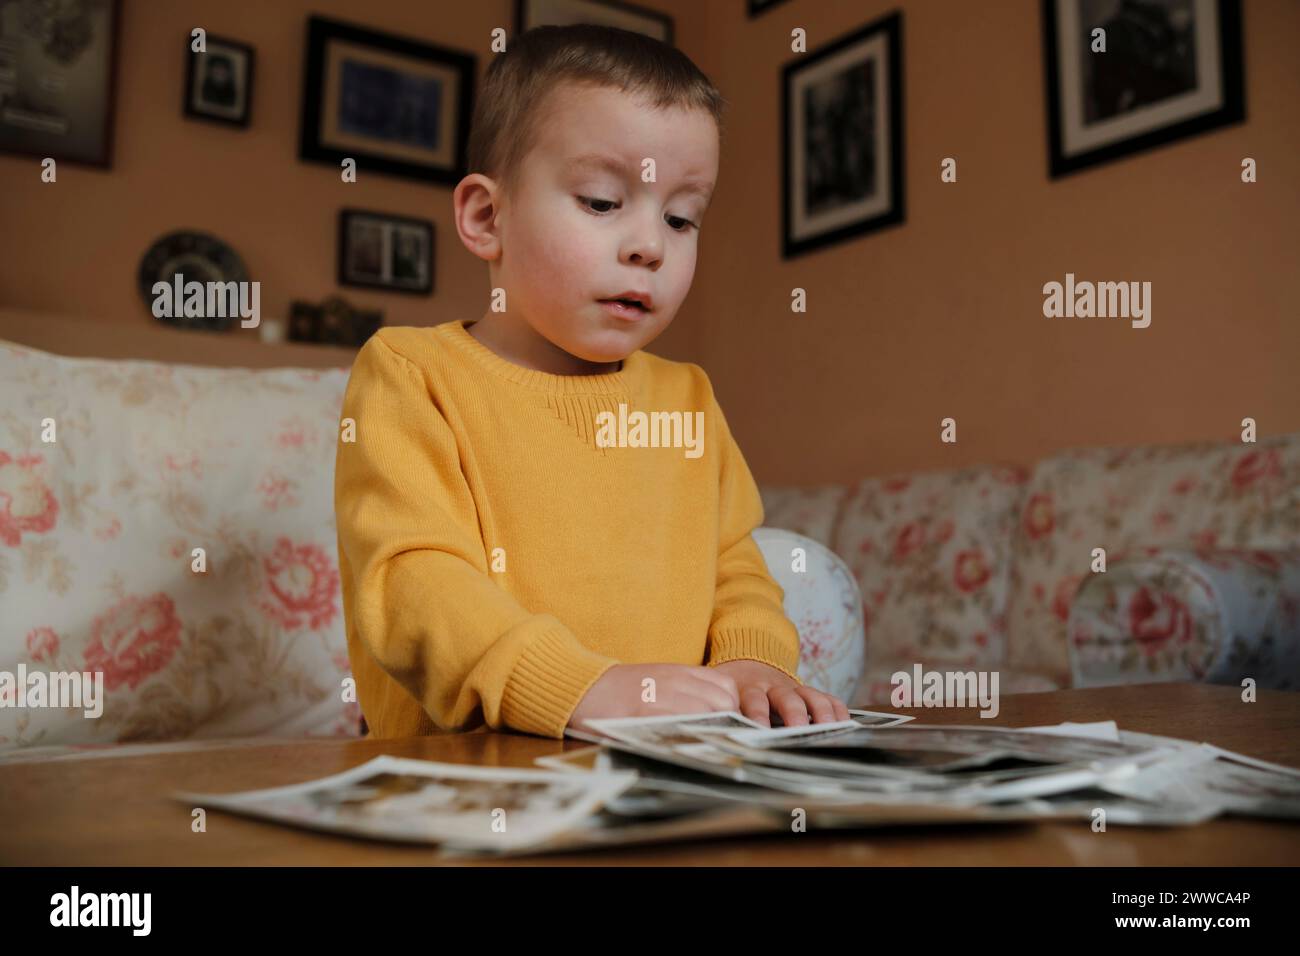 Curious boy looking at old photographs on table at home Stock Photo